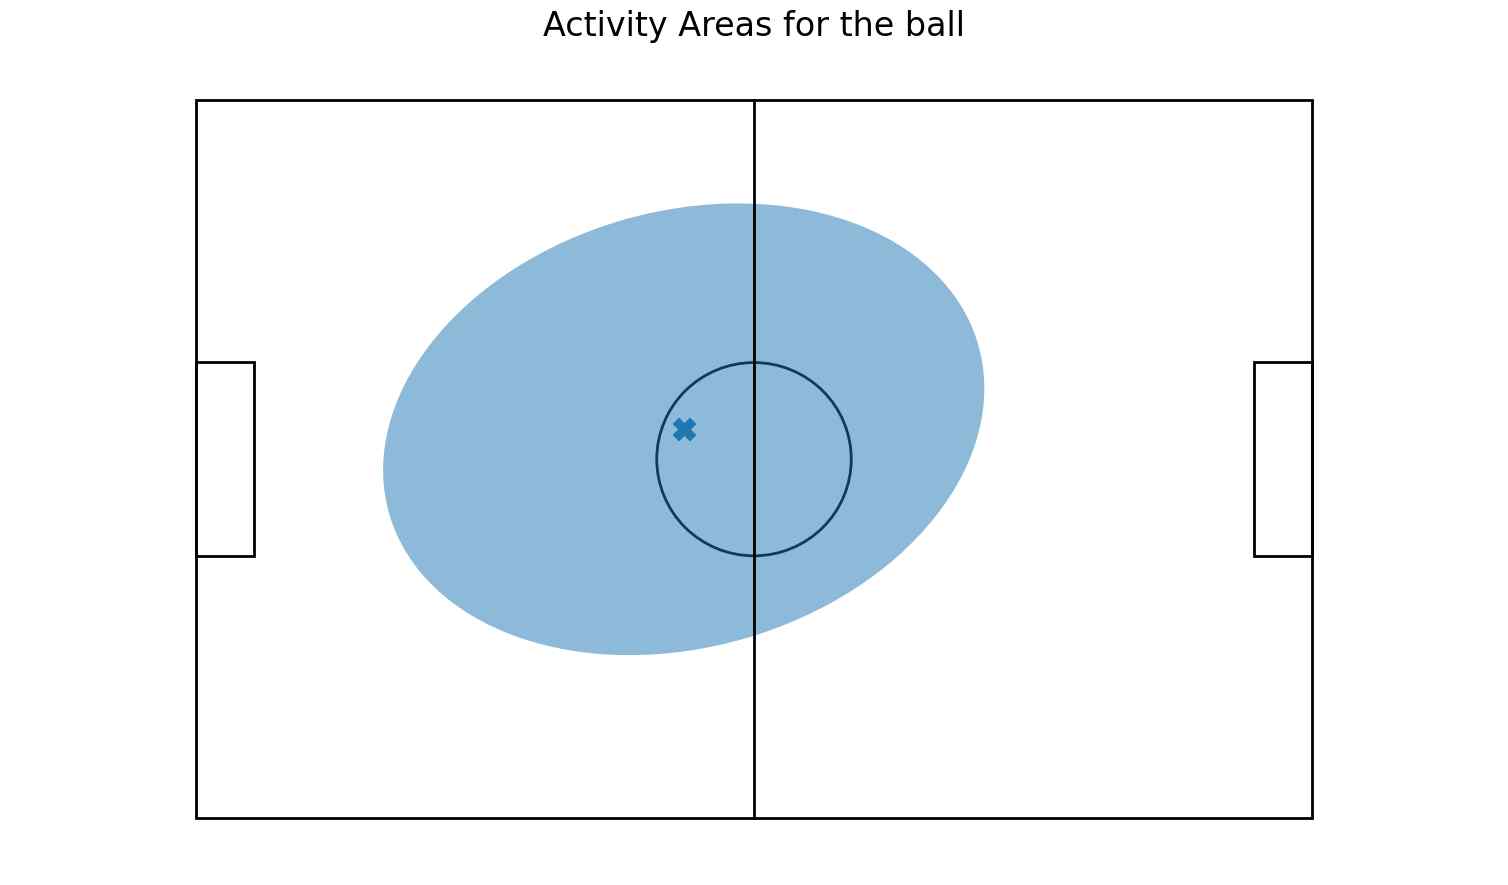 A top-view diagram of a soccer field with an ellipse representing the activity area of the ball during a 30-minute match.